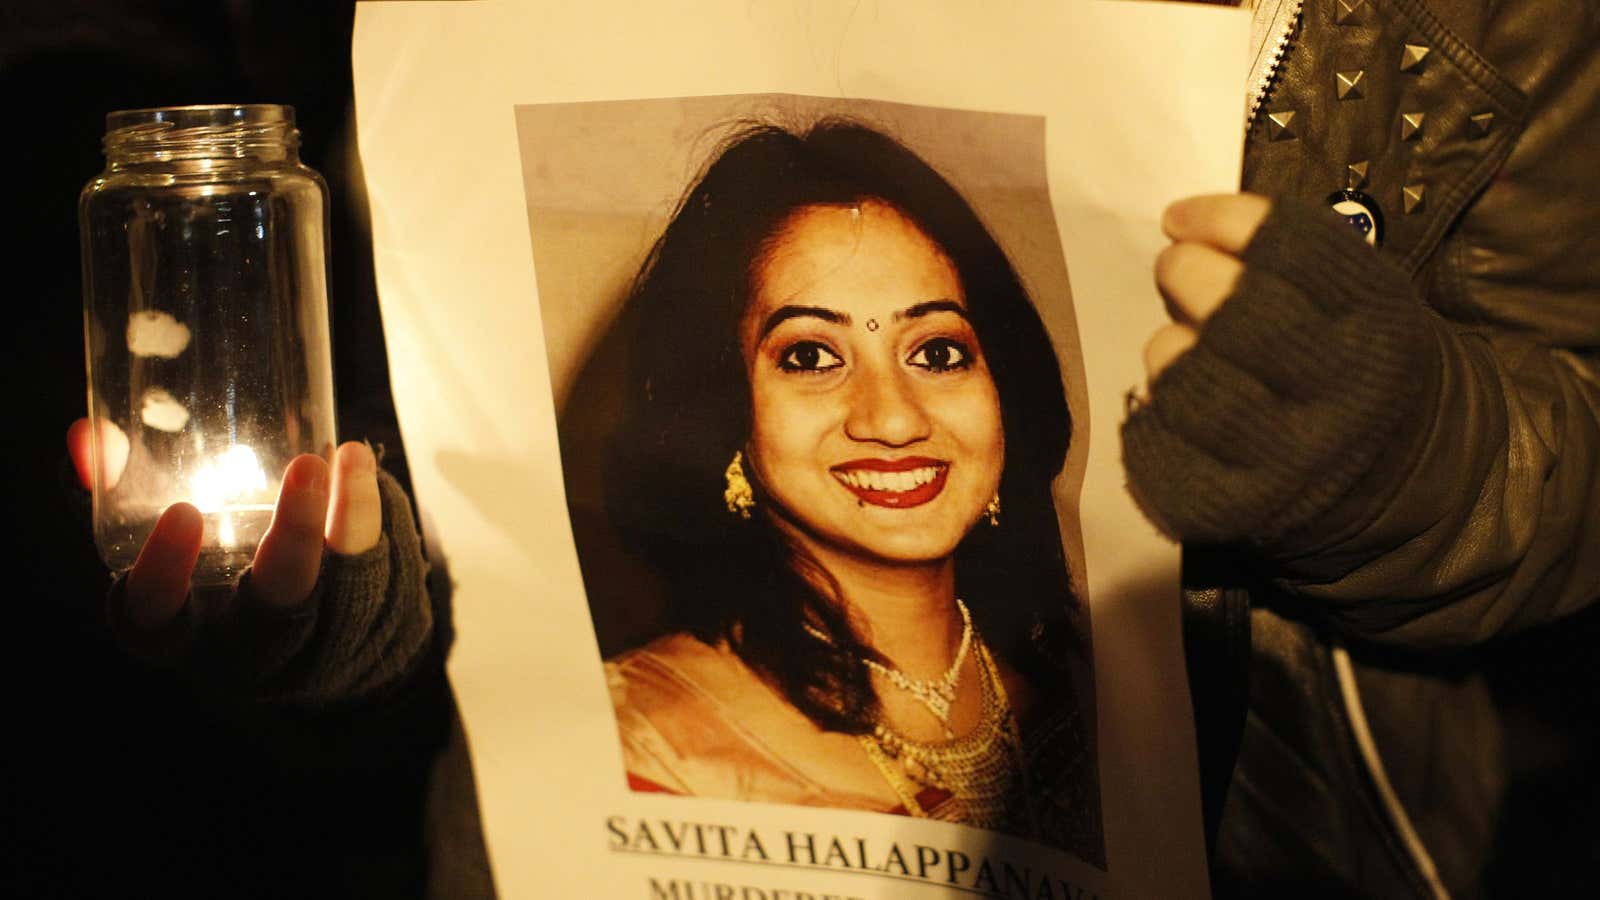 An activist for abortion legalization holds up an image of Savita Halappanavar, who died of a miscarriage after being denied an abortion in 2012.